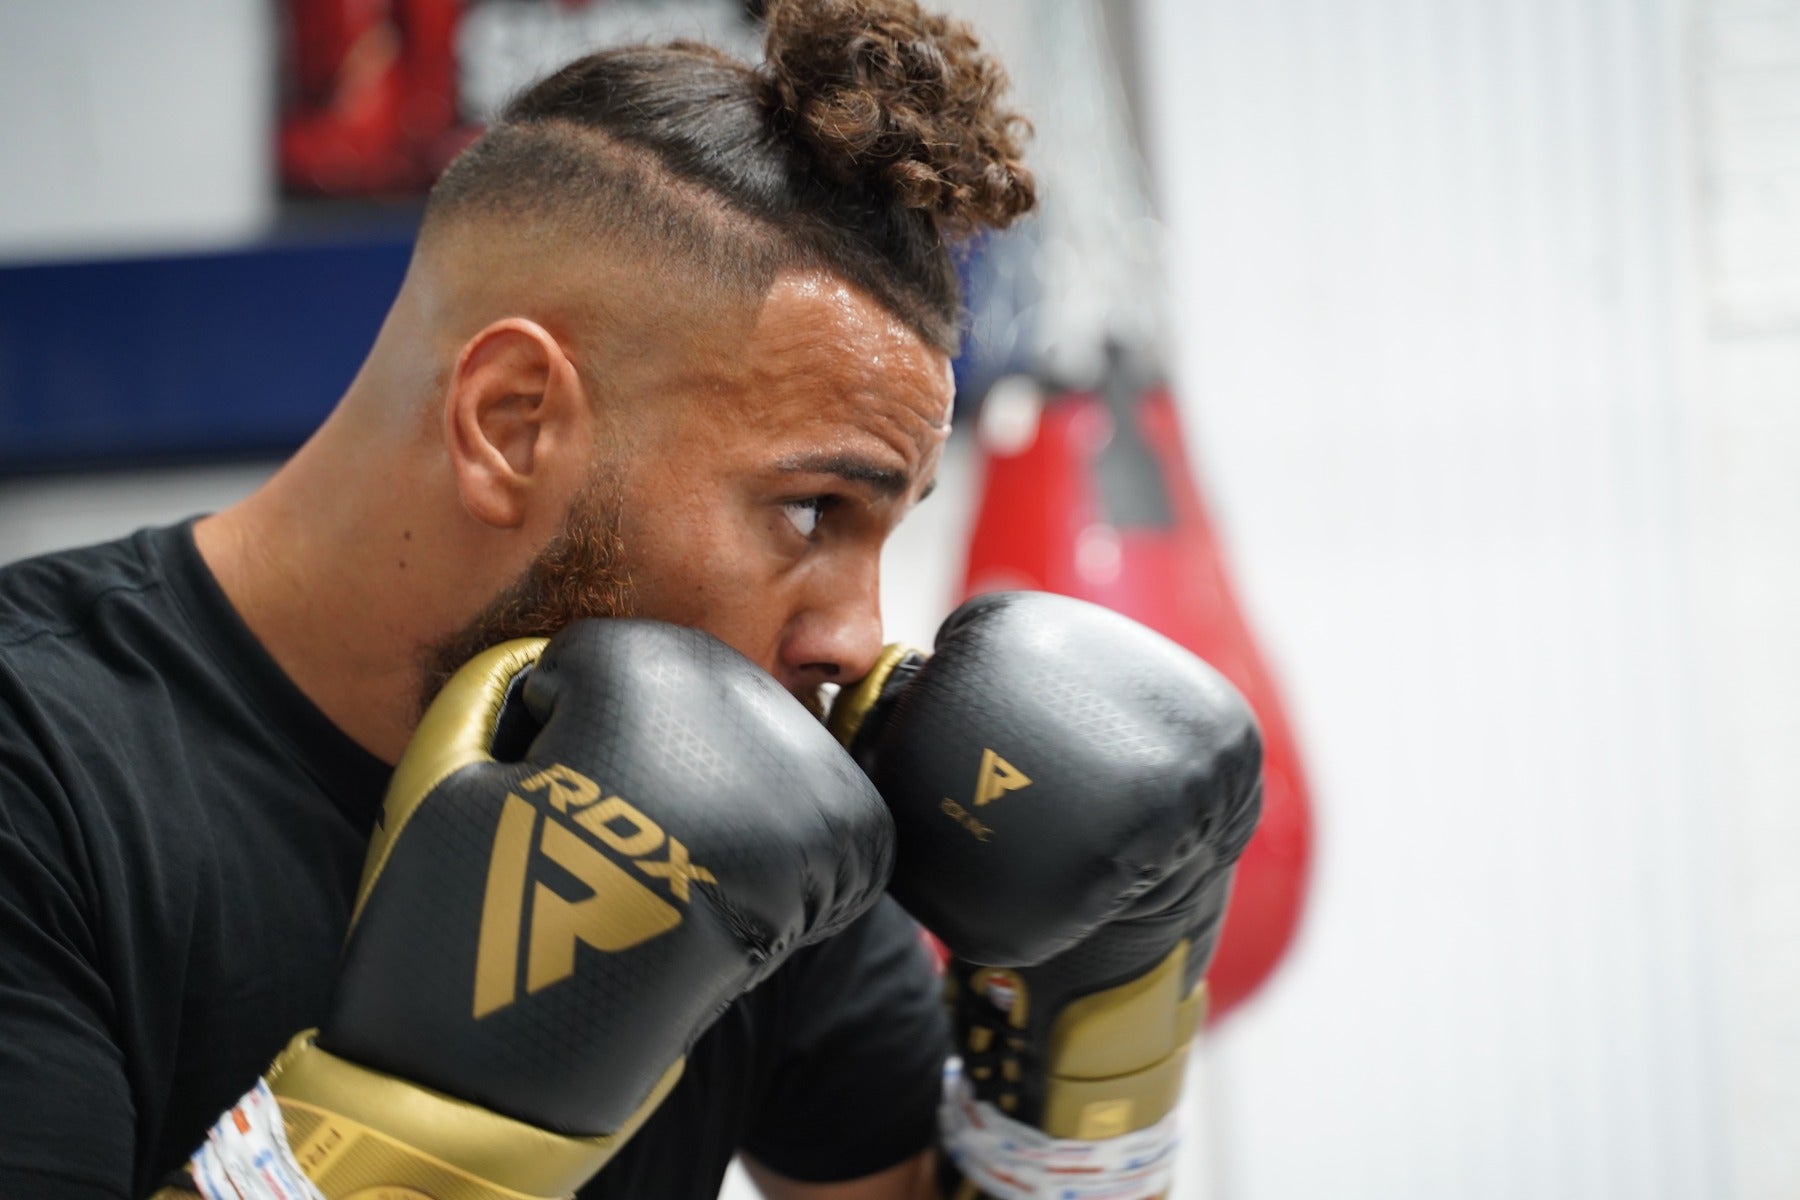 Buy Boxing Sparring Gloves – RDX Sports